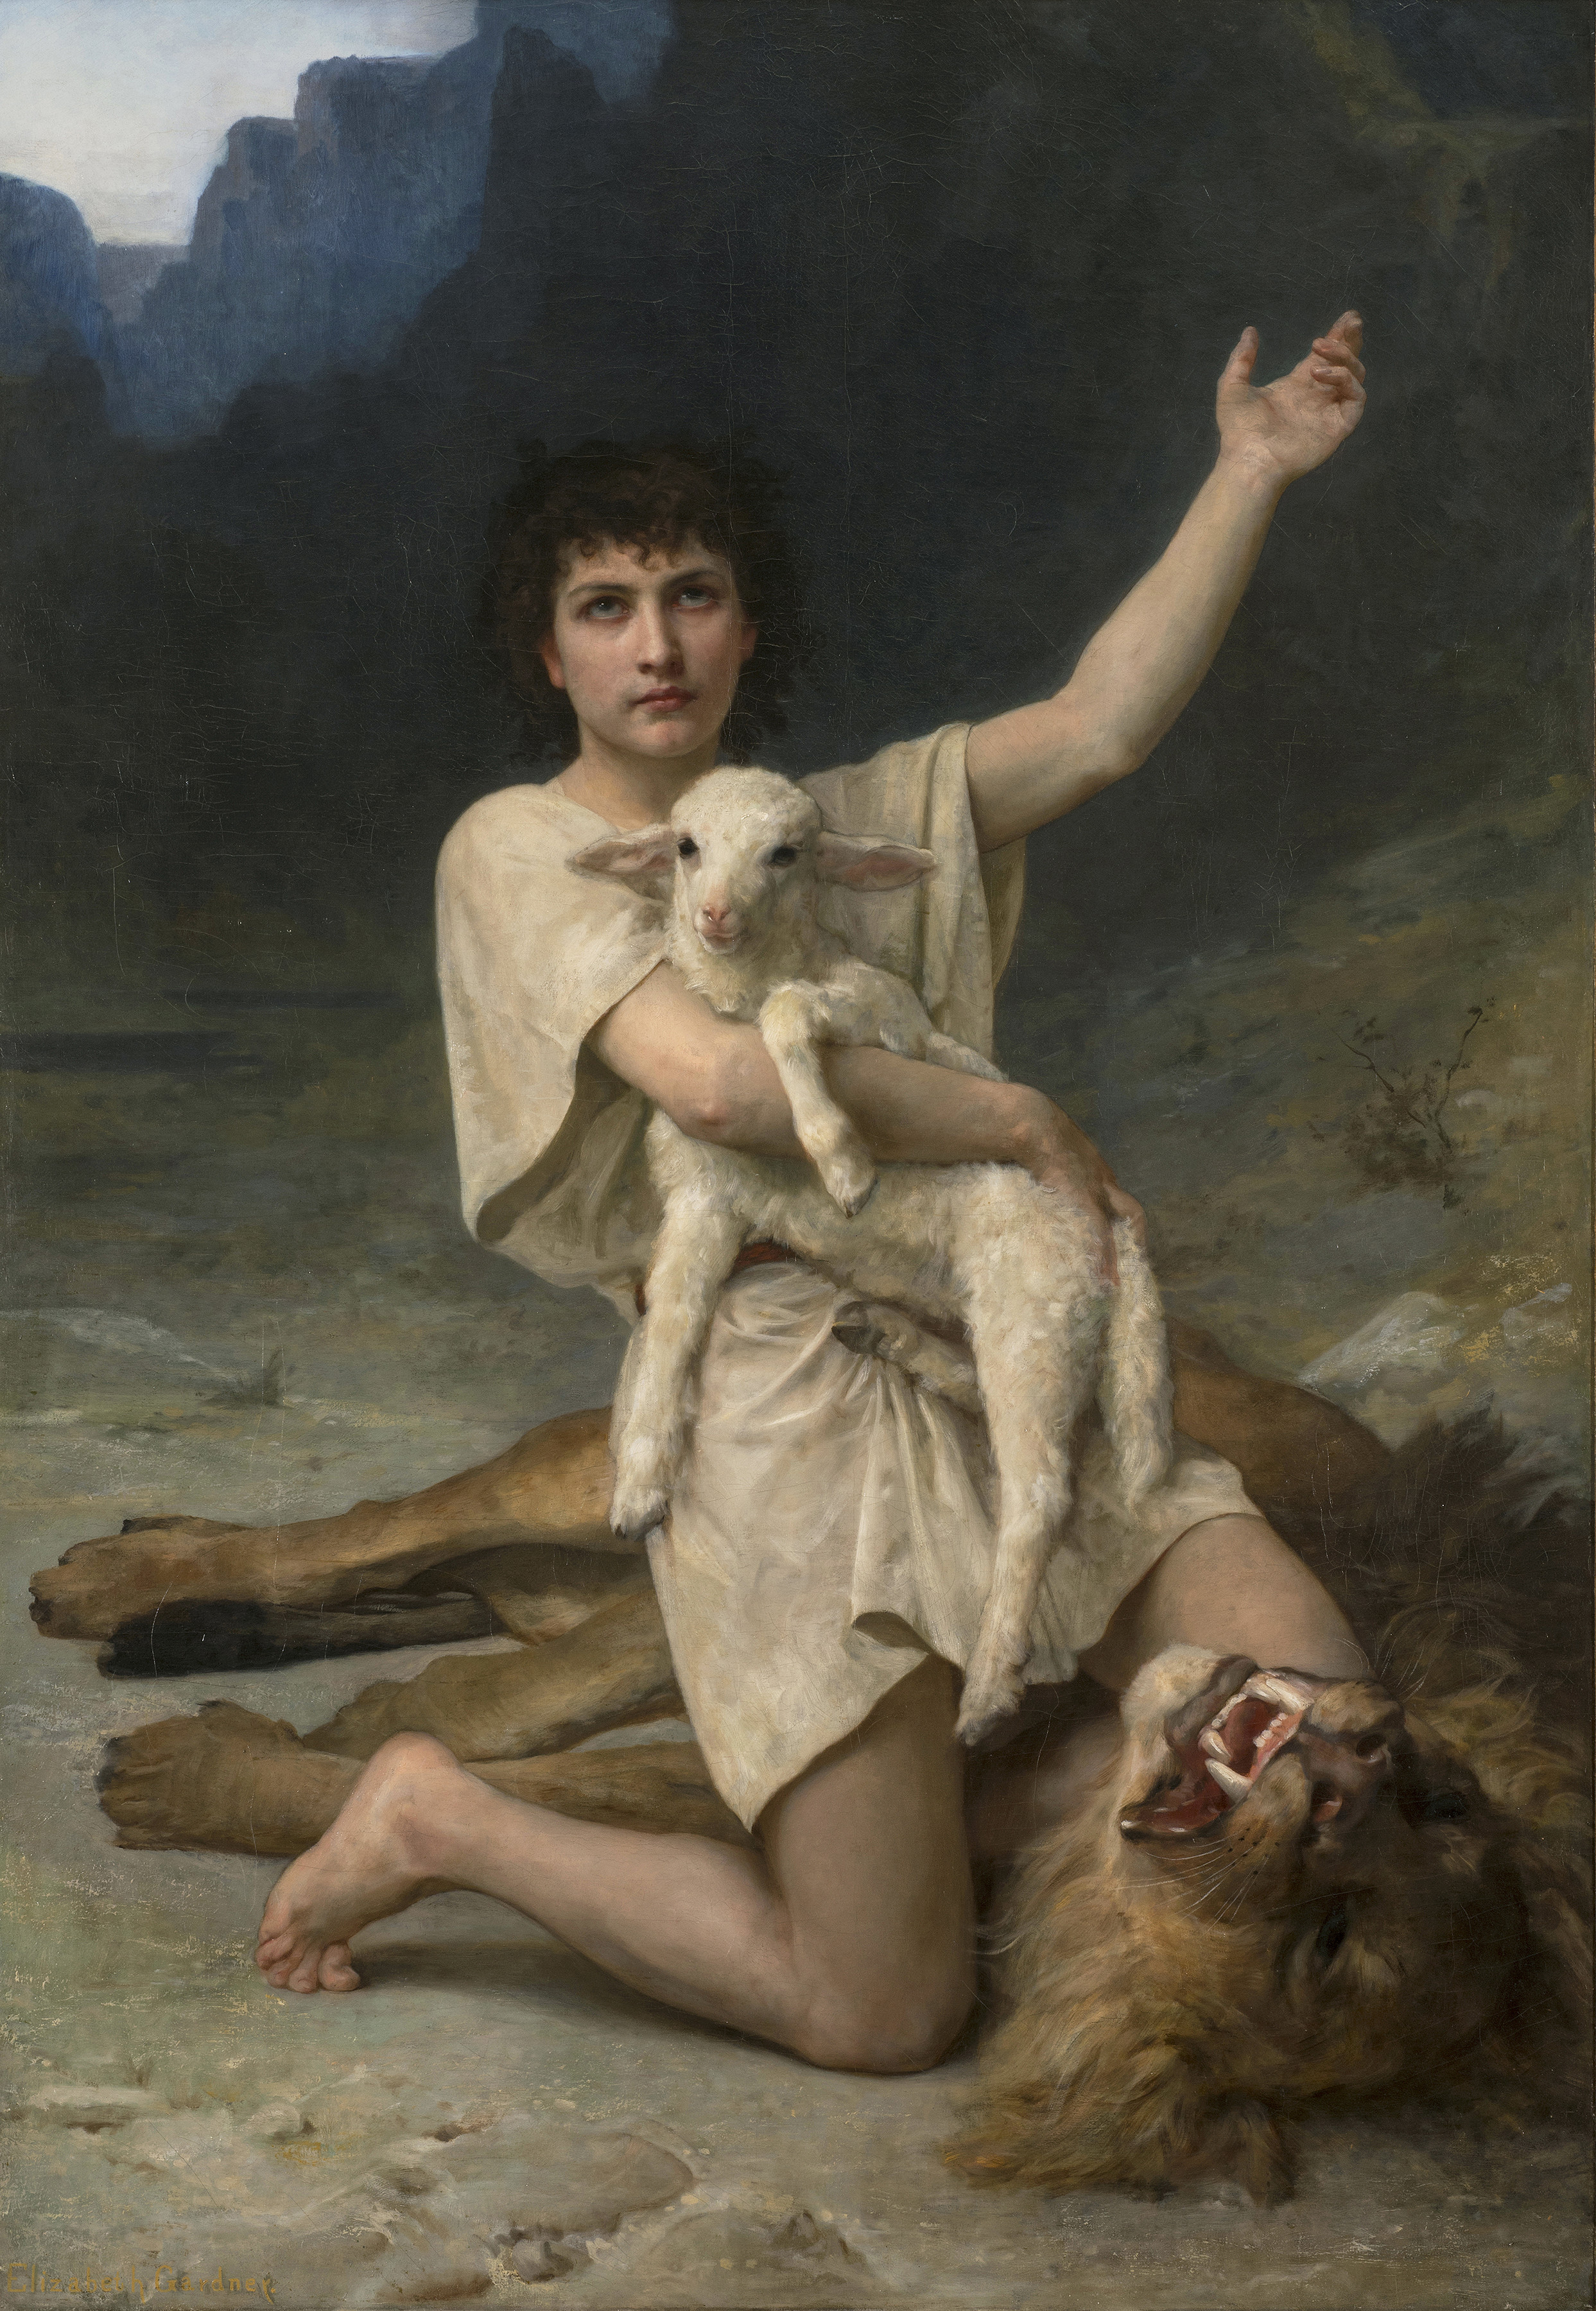 Realistic painting depicts a light-skinned young man with dark curly hair, wearing a white tunic, set before distant mountains. He is kneeling victoriously atop a fearsome dead lion, clutching a serene lamb his right arm and gesturing heavenward with his left arm.